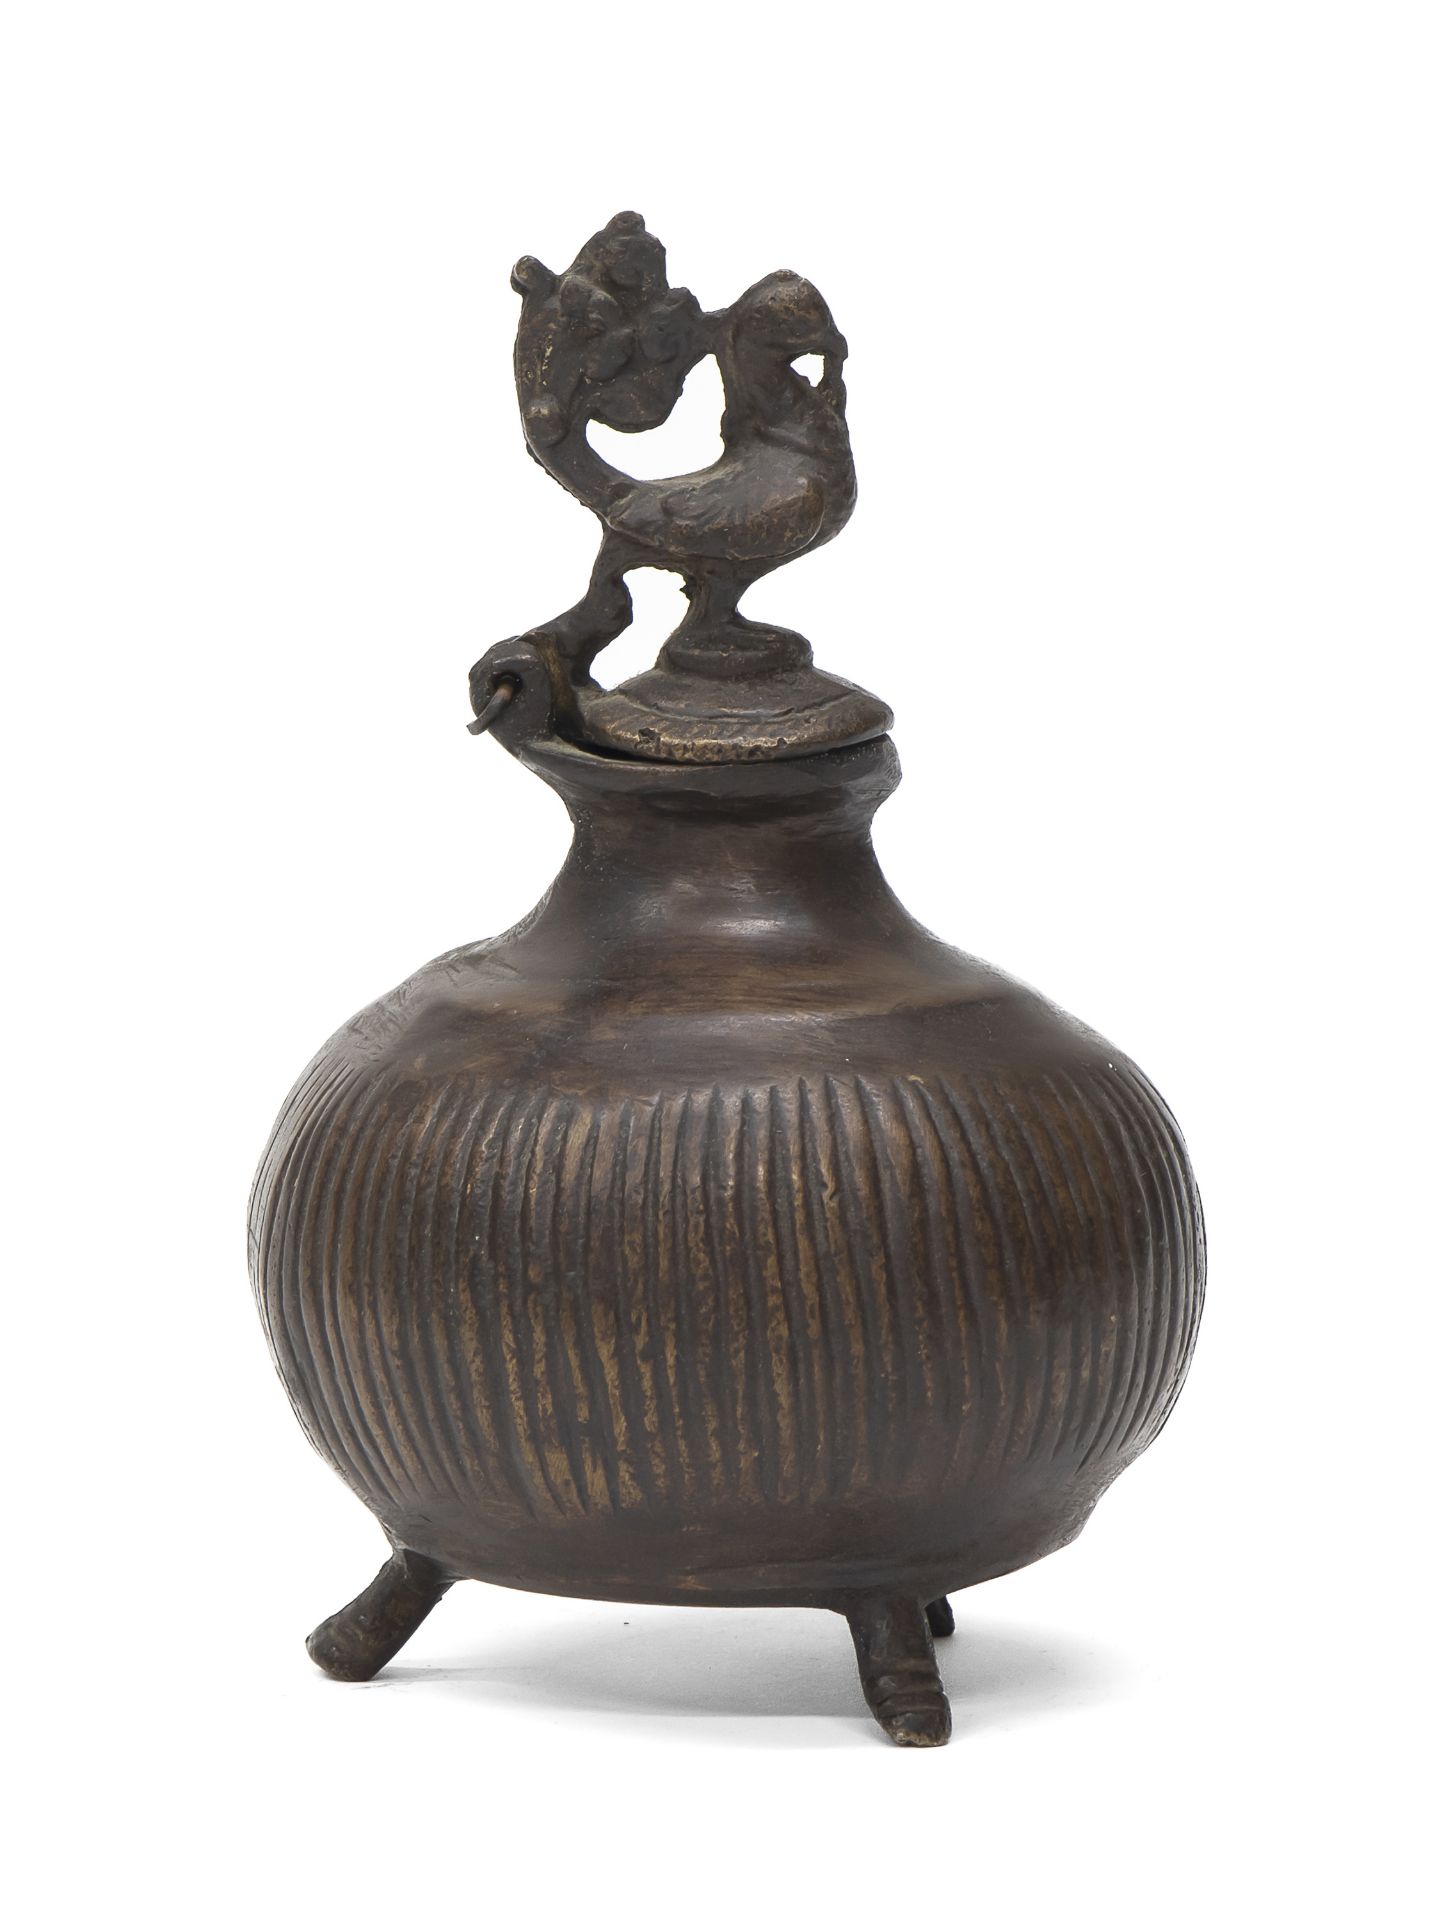 A SMALL LIDDED BRONZE JAR INDIA EARLY 20TH CENTURY